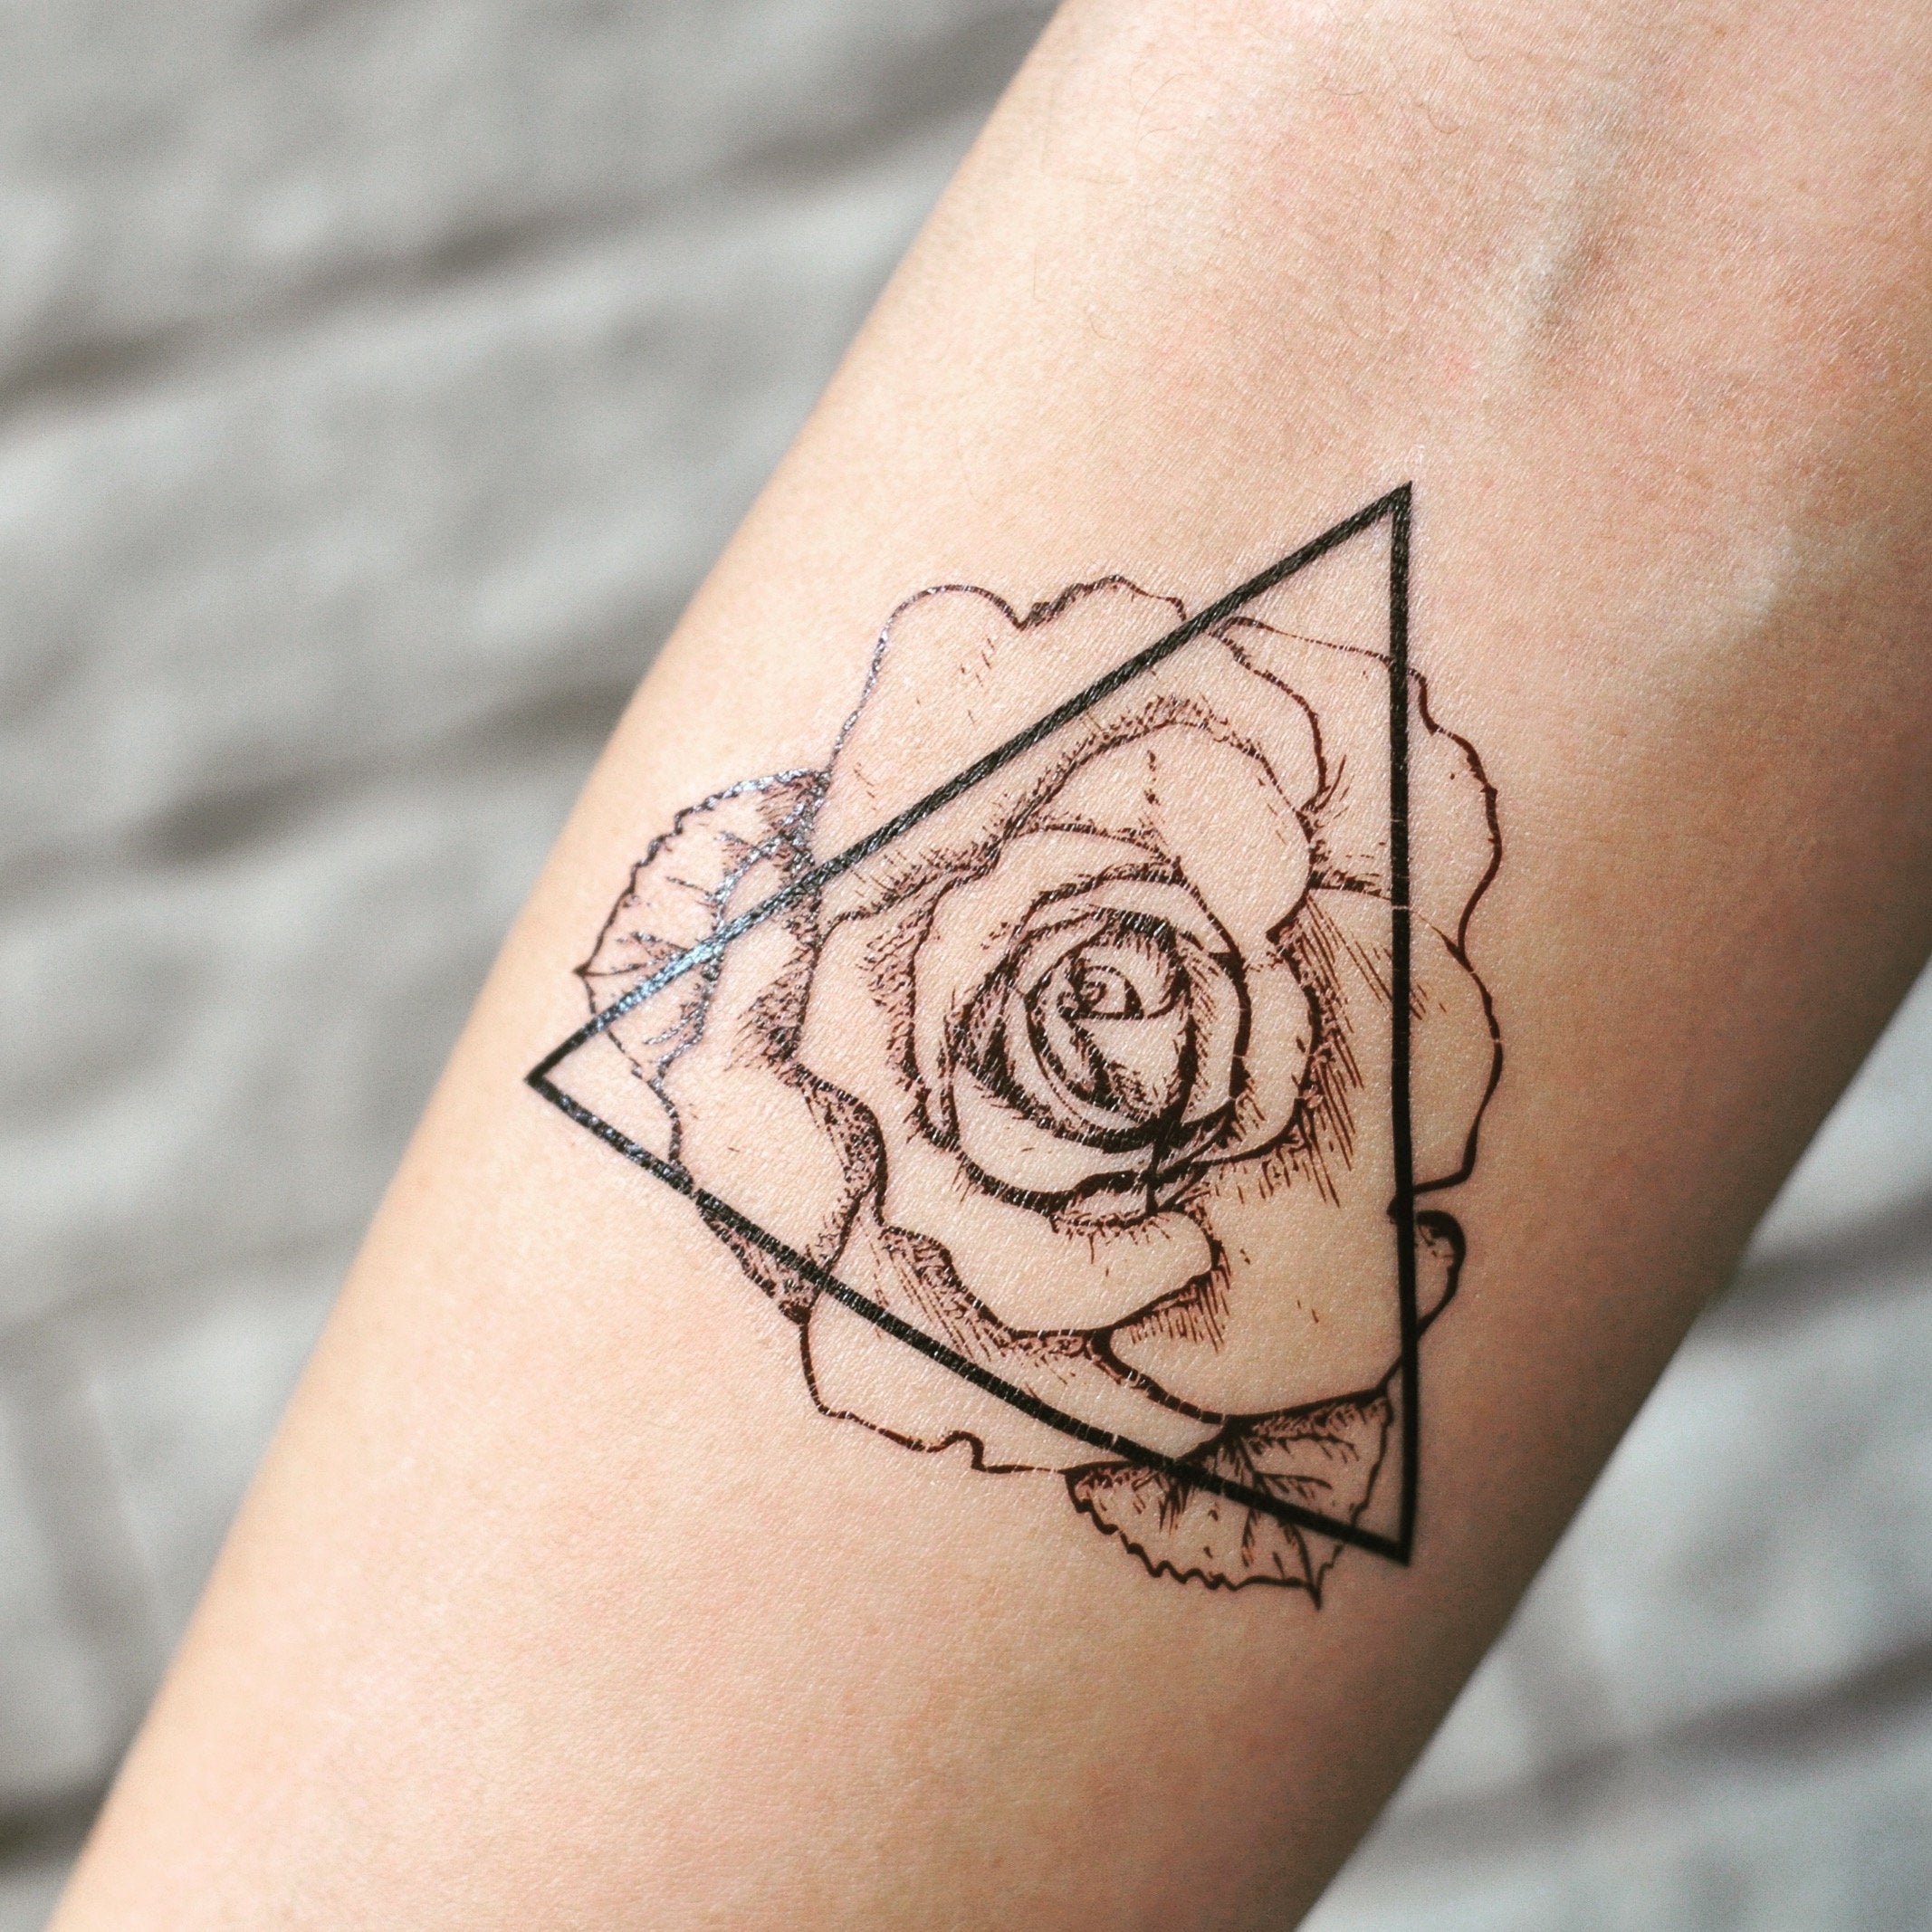 Triangle Rose Outline Temporary Tattoo Sticker - OhMyTat